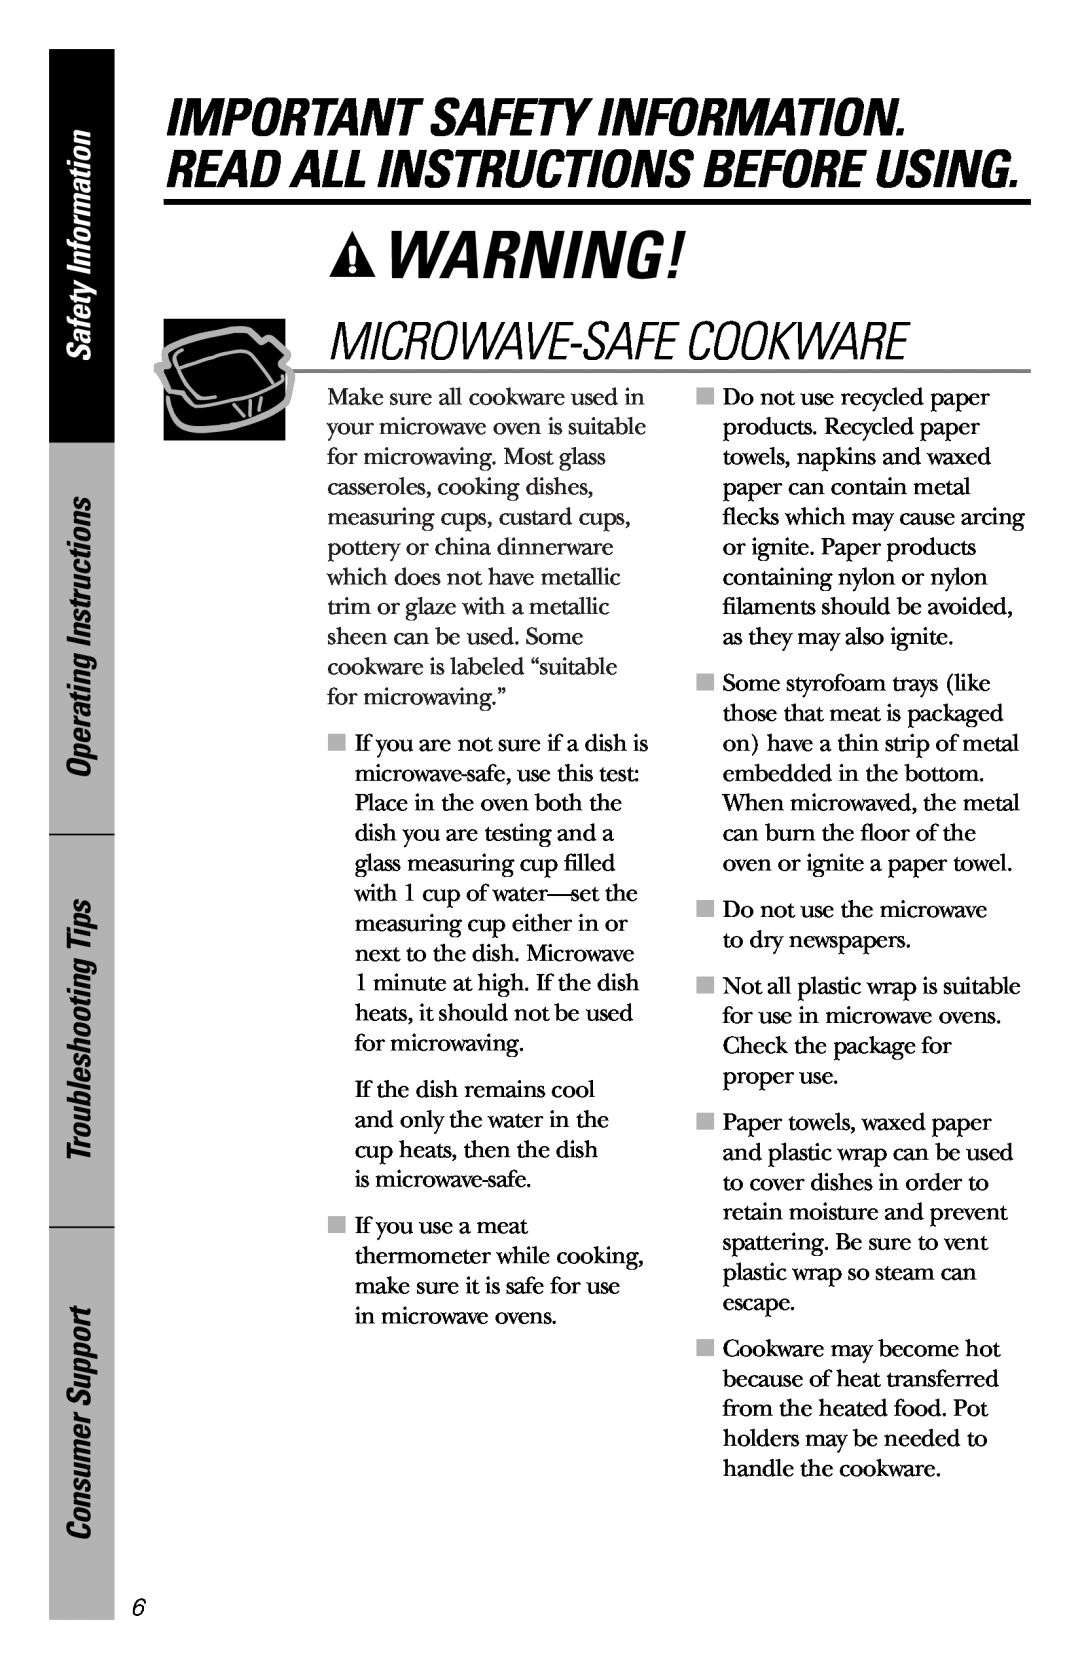 GE JES1136 Microwave-Safe Cookware, Operating Instructions Troubleshooting Tips Consumer Support, Safety Information 